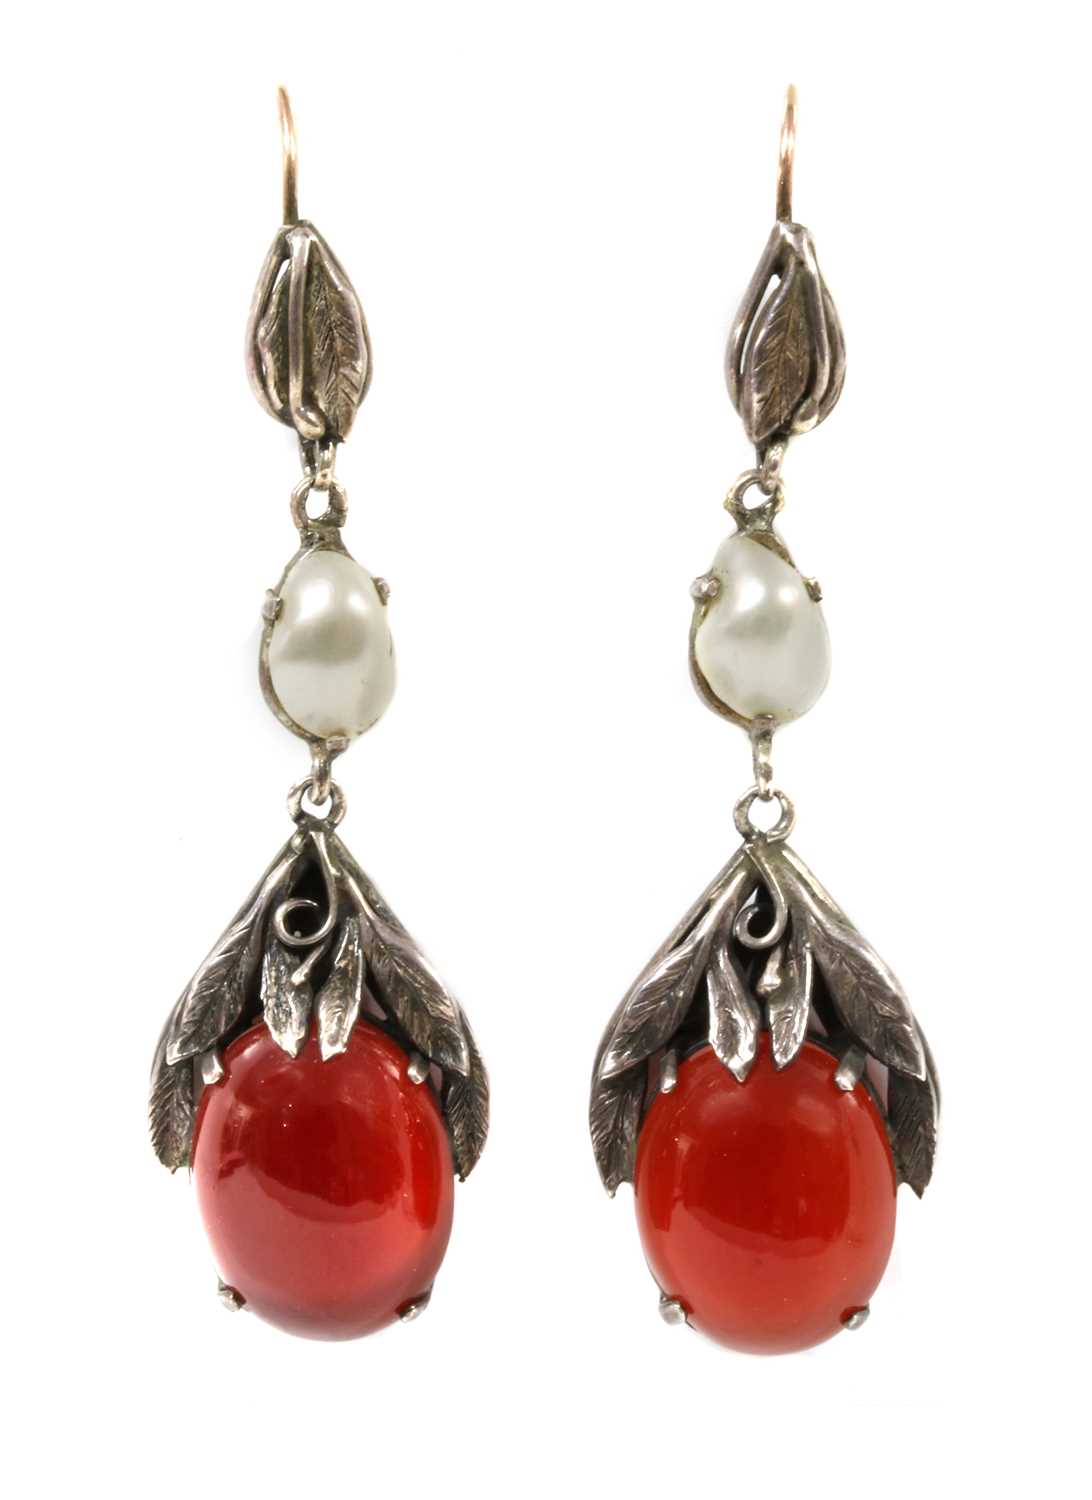 Lot 120 - A pair of Arts and Crafts silver and gold, cornelian and blister pearl drop earrings, c.1920